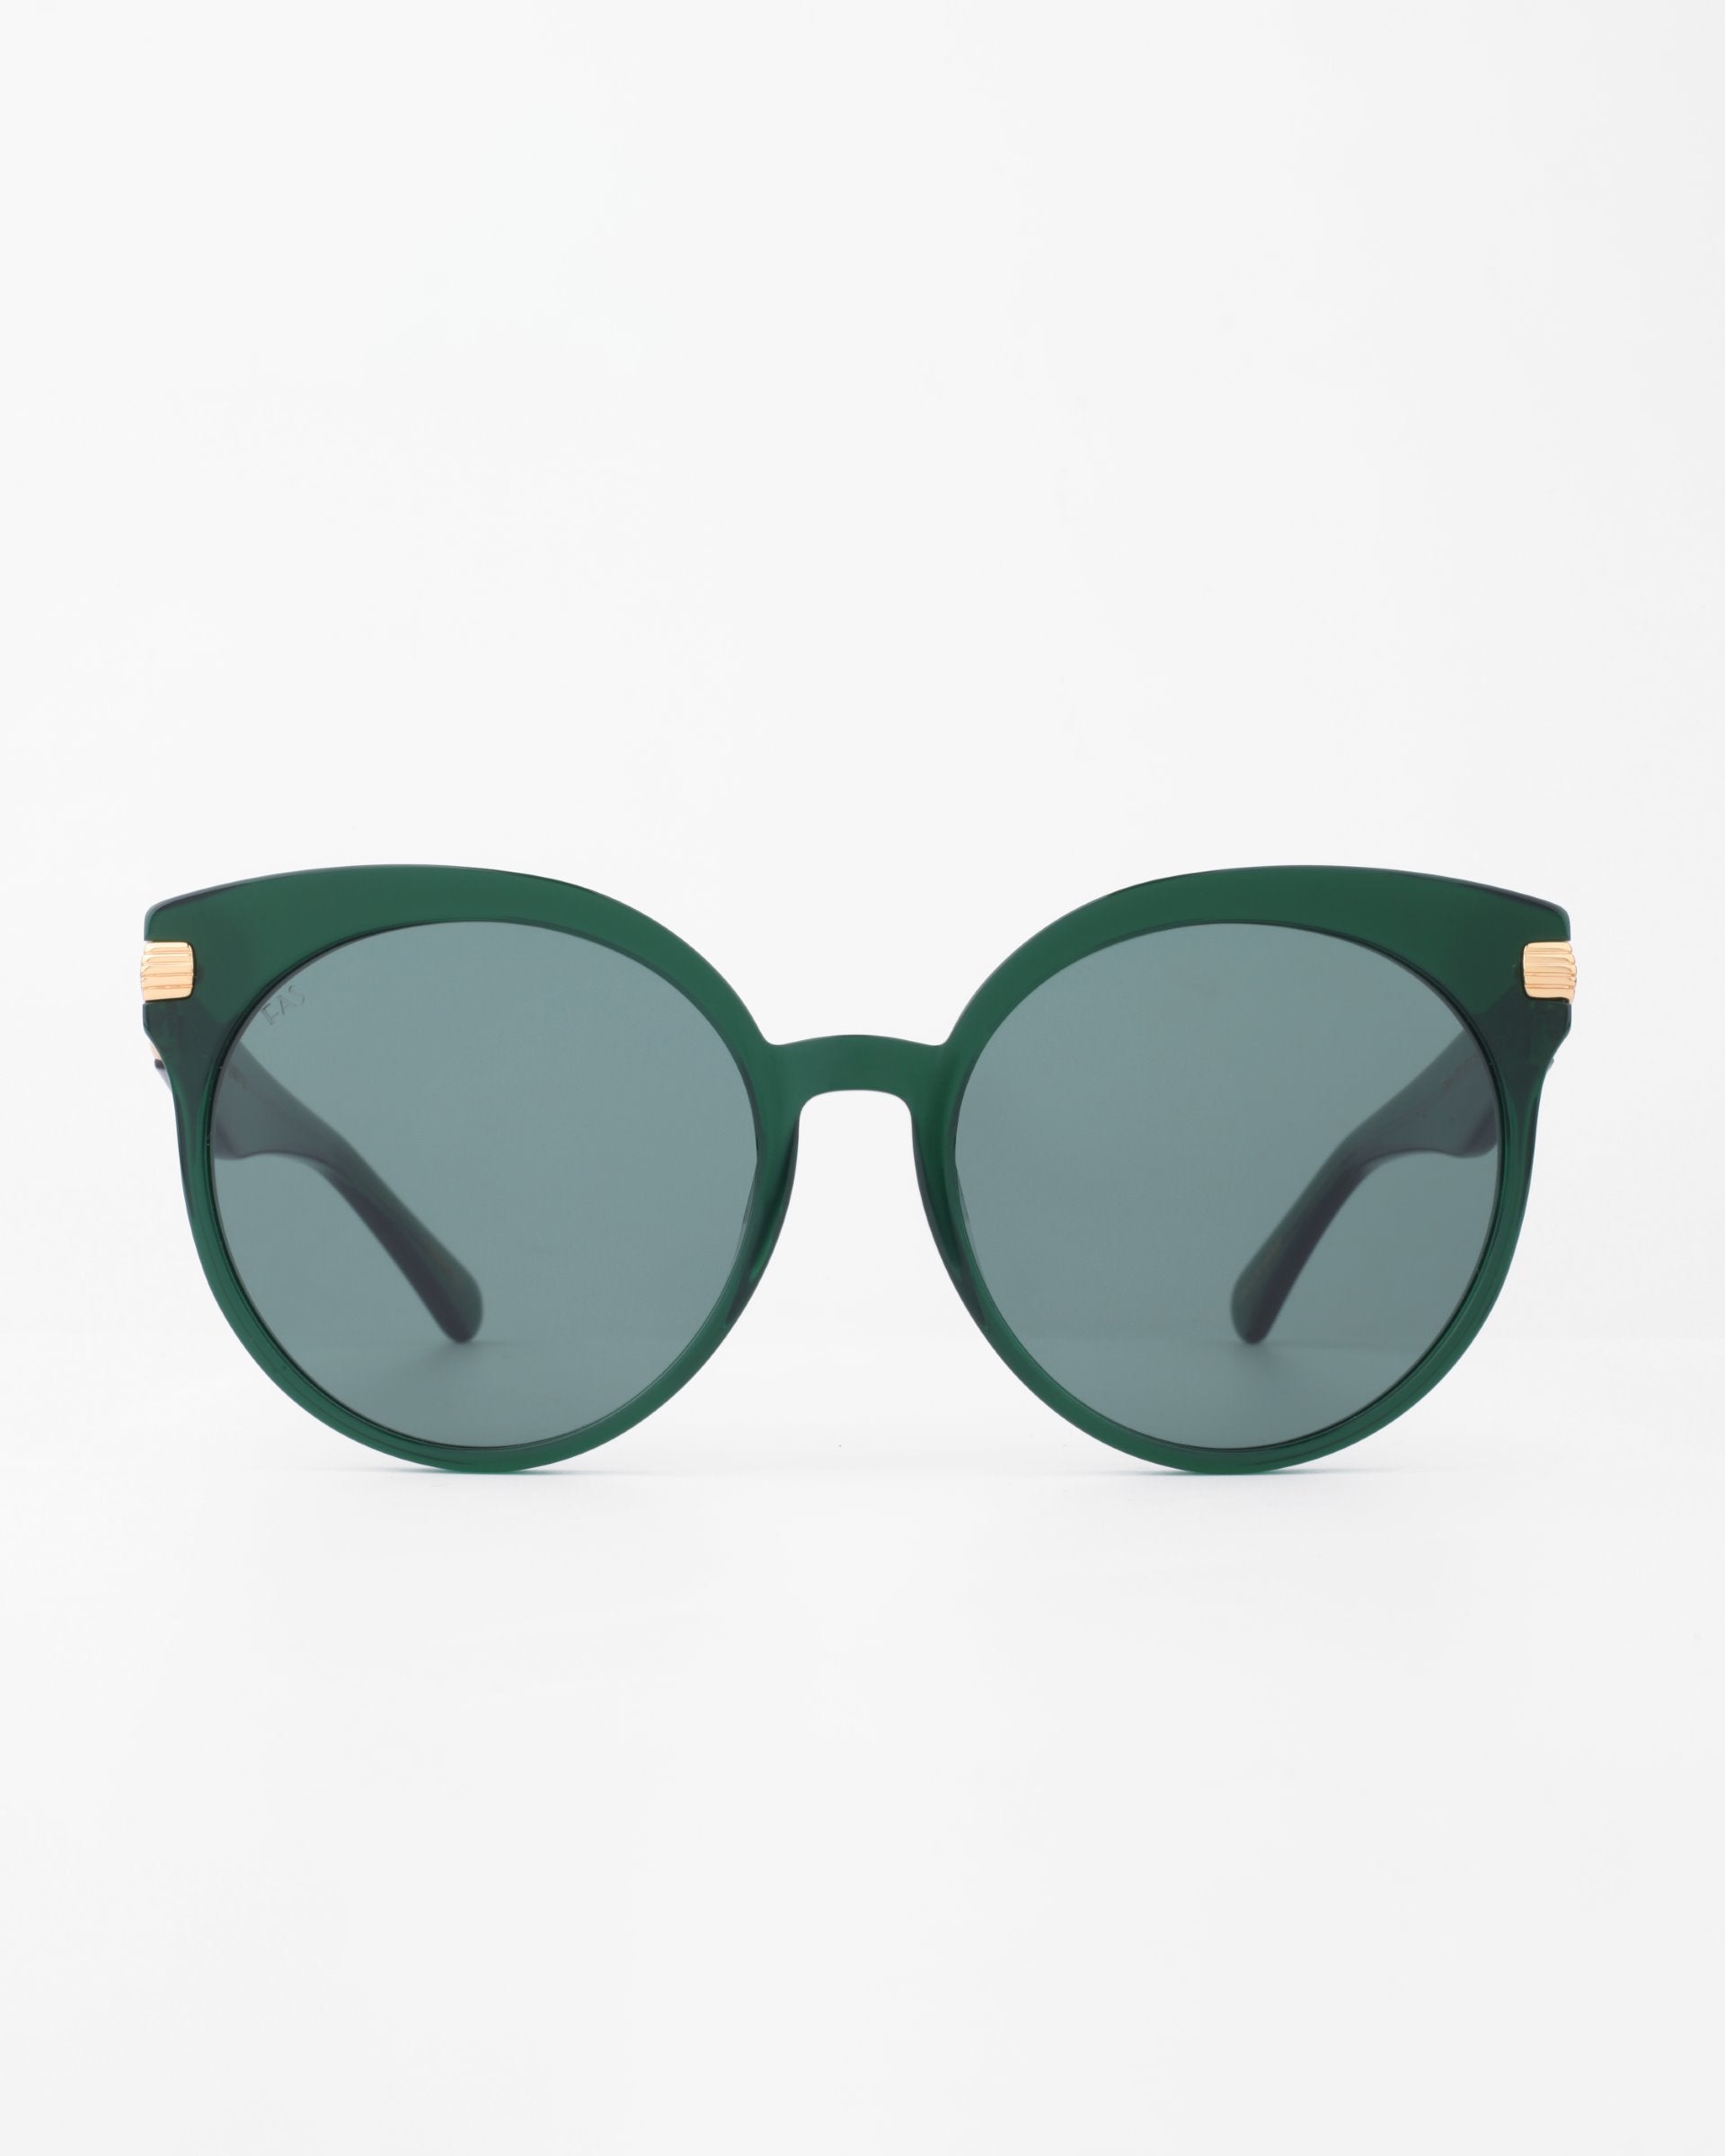 Front view of a pair of dark green round sunglasses called Muse by For Art&#39;s Sake®, with dark tinted, shatter-resistant nylon lenses. The frame boasts a sleek design made from handmade plant-based acetate, highlighted by small 18-karat gold-plated accents on the temples. The background is plain white, emphasizing the stylish eyewear.